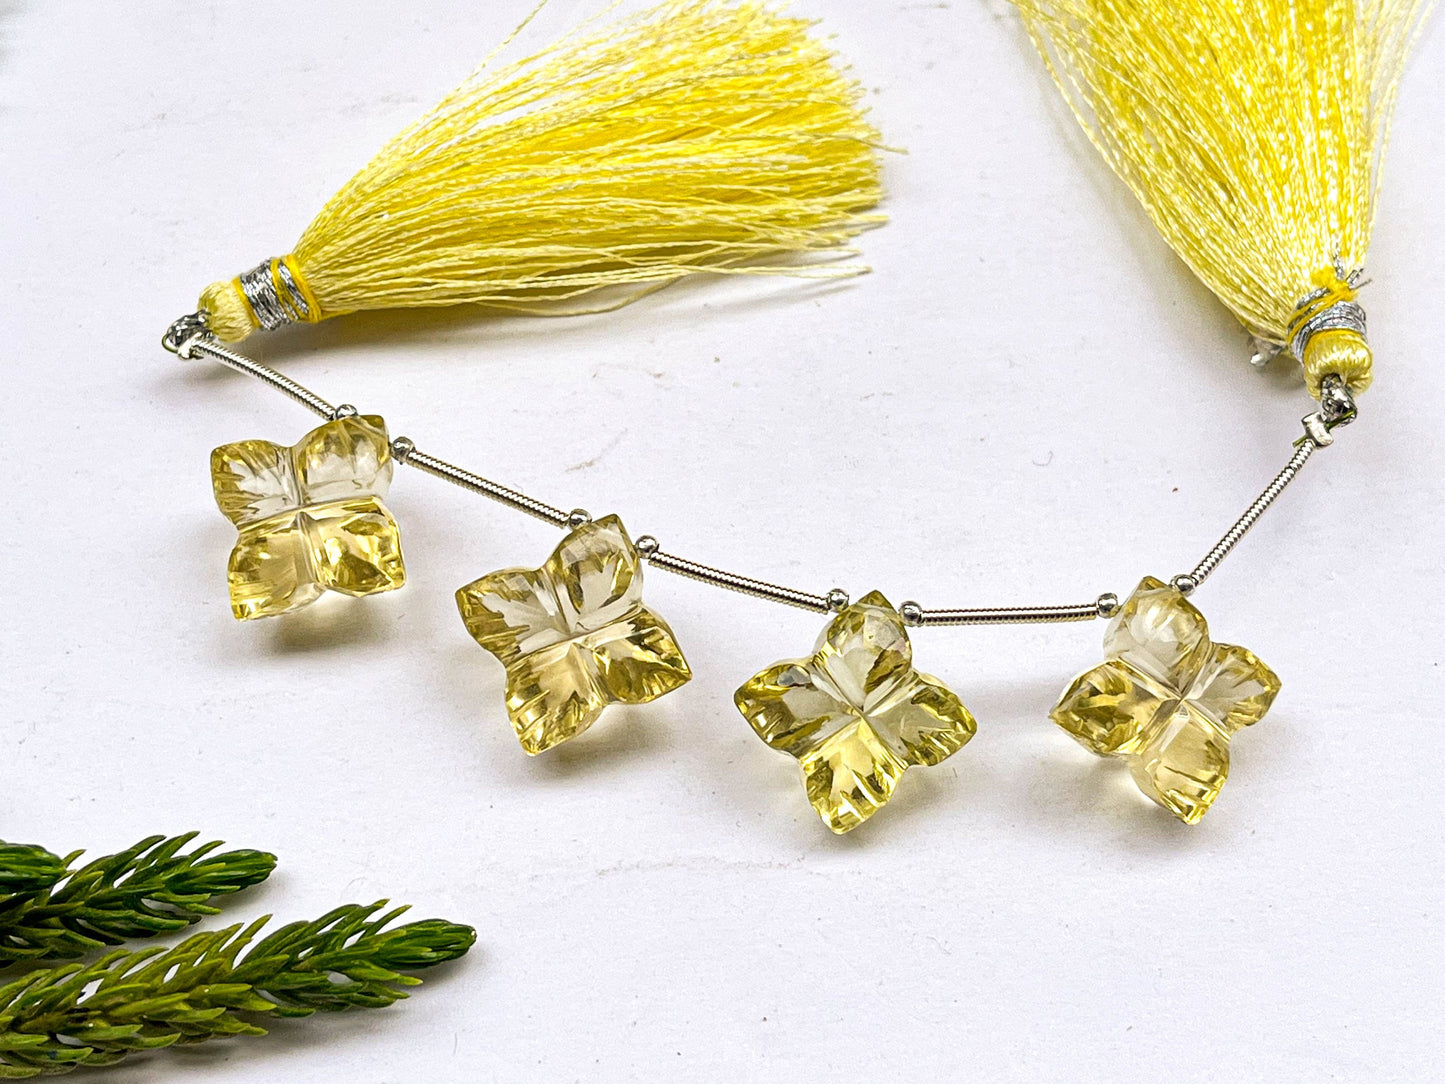 Lemon Quartz Buff Top Flower Carving Beads, 13x13mm, 4 Pieces, Natural Gemstone, Beadsforyourjewellery